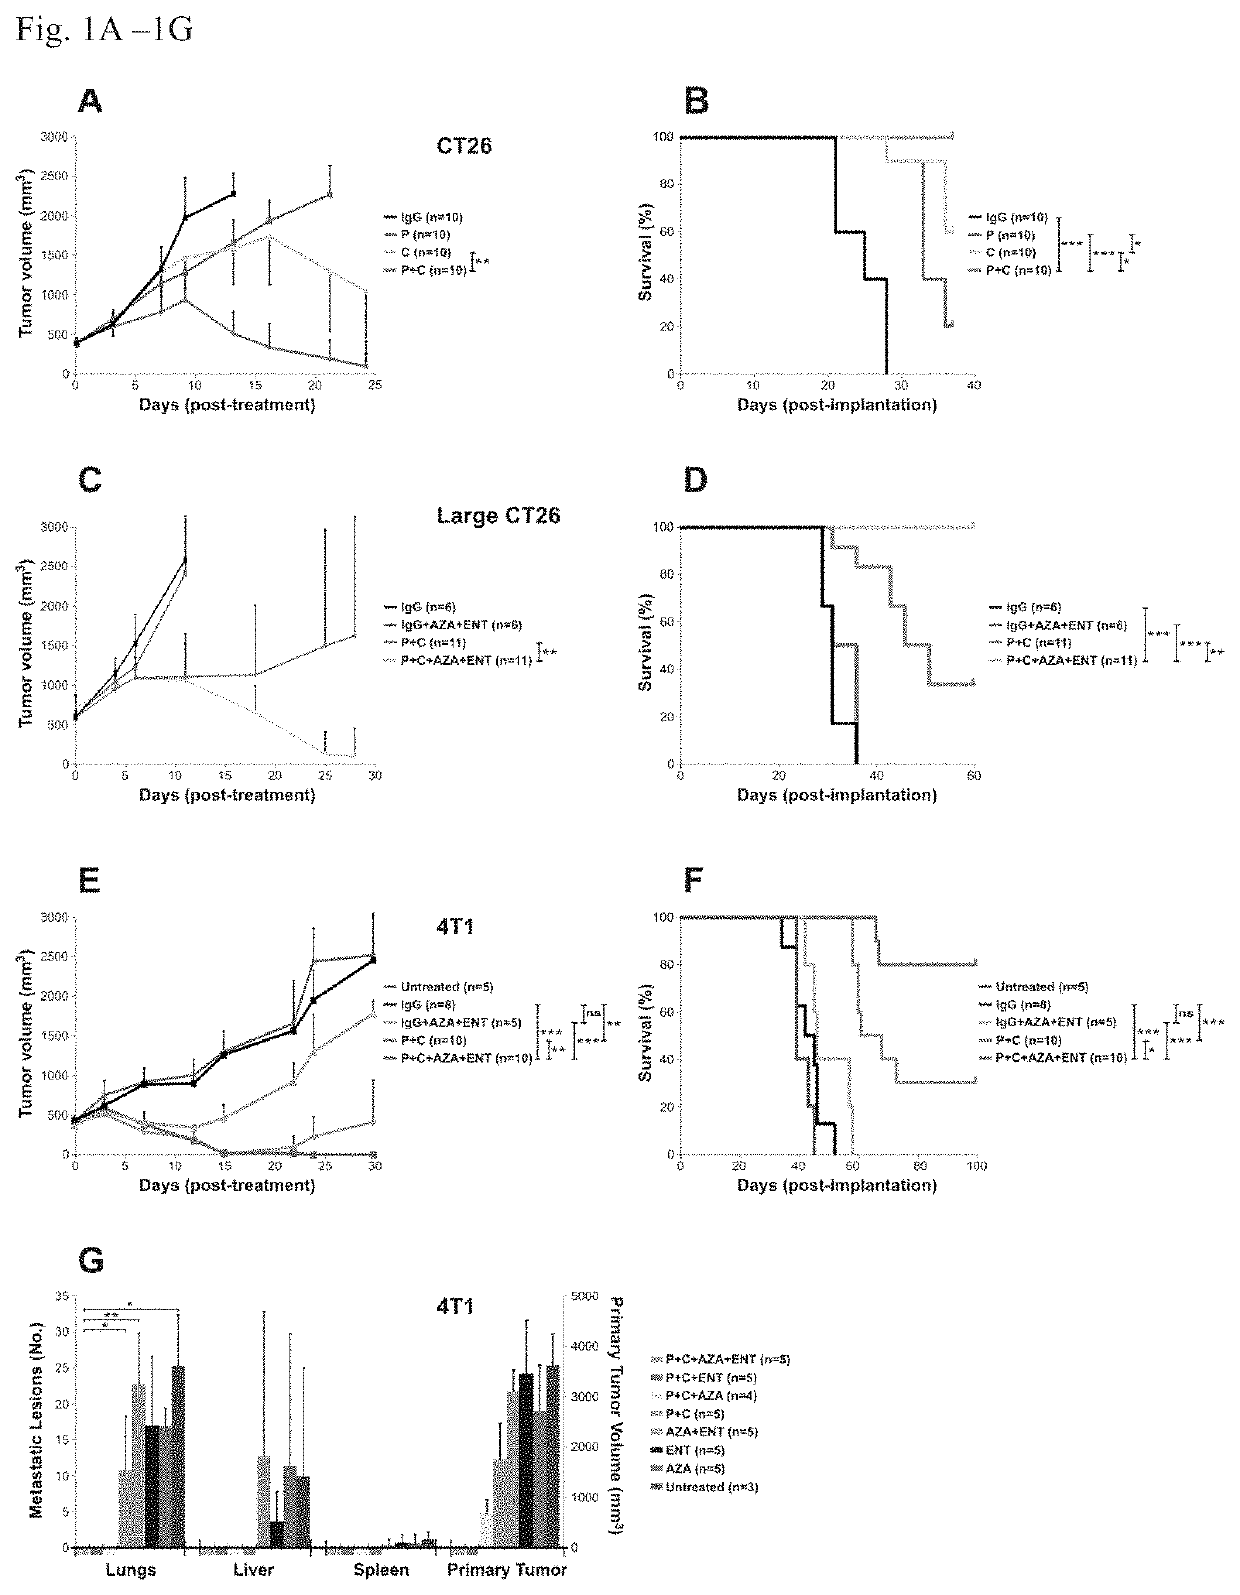 Suppression of myeloid derived suppressor cells and immune checkpoint blockade